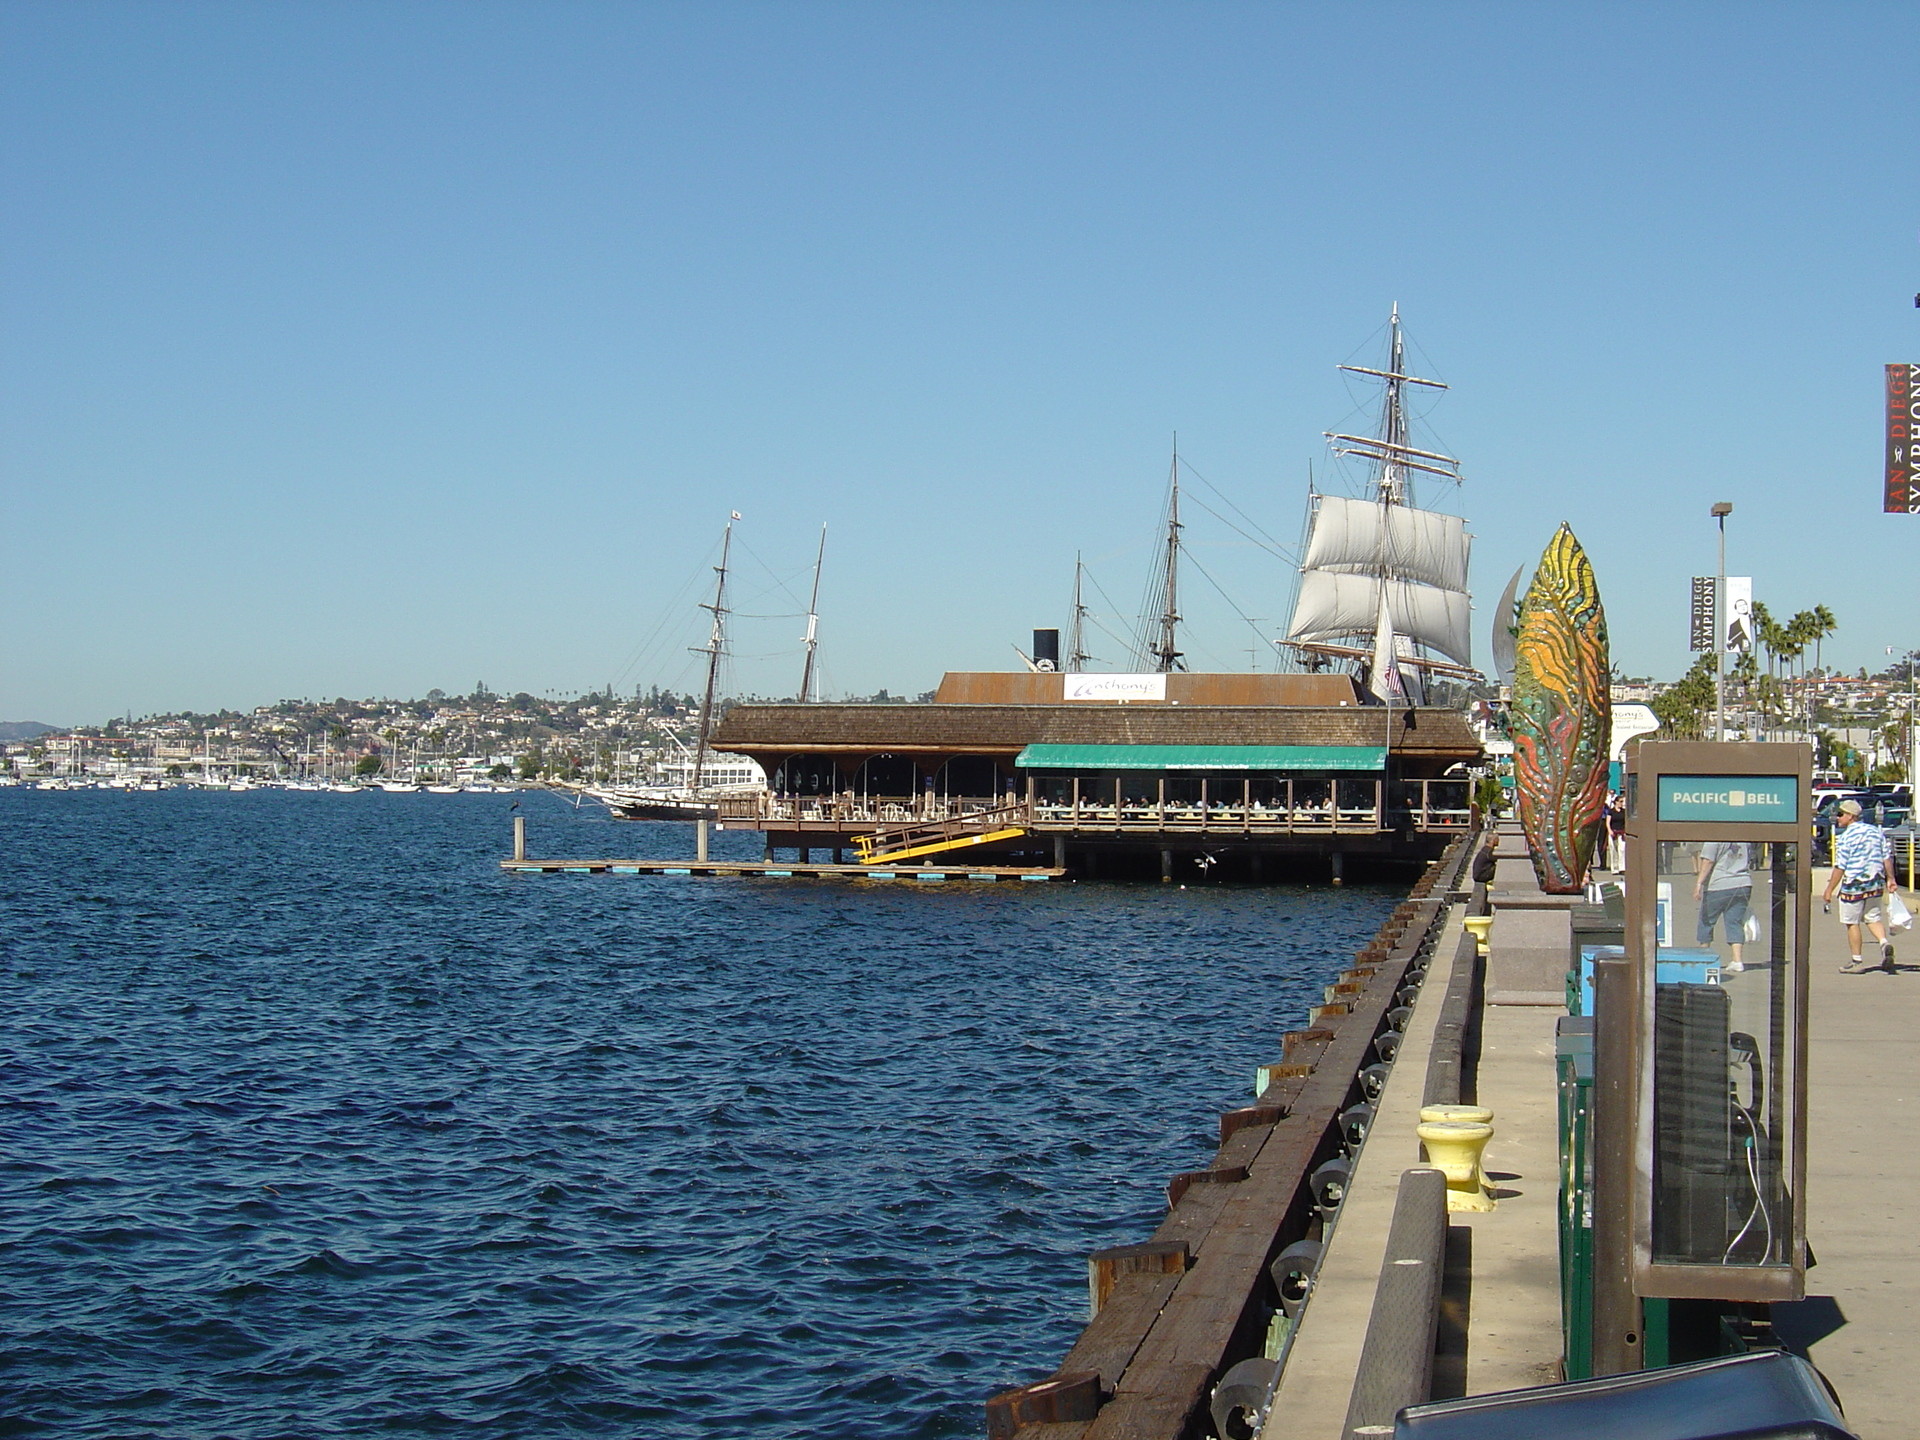 1920x1440 San Diego images San Diego Port HD wallpaper and background photos